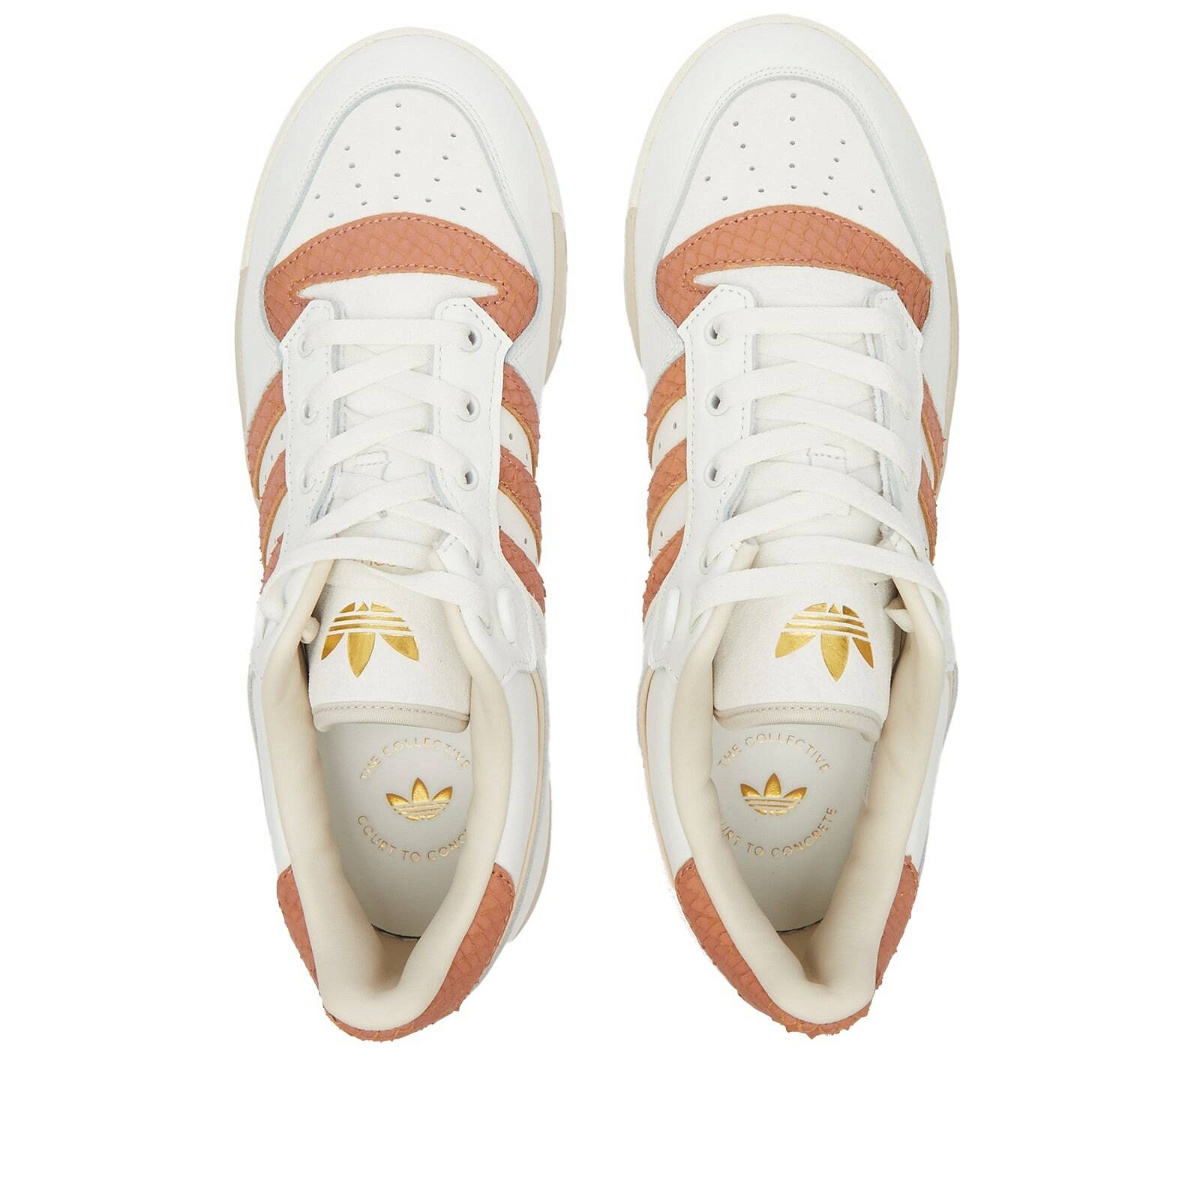 Adidas Rivalry Low 86 Sneakers in Core White/Clay Strata adidas